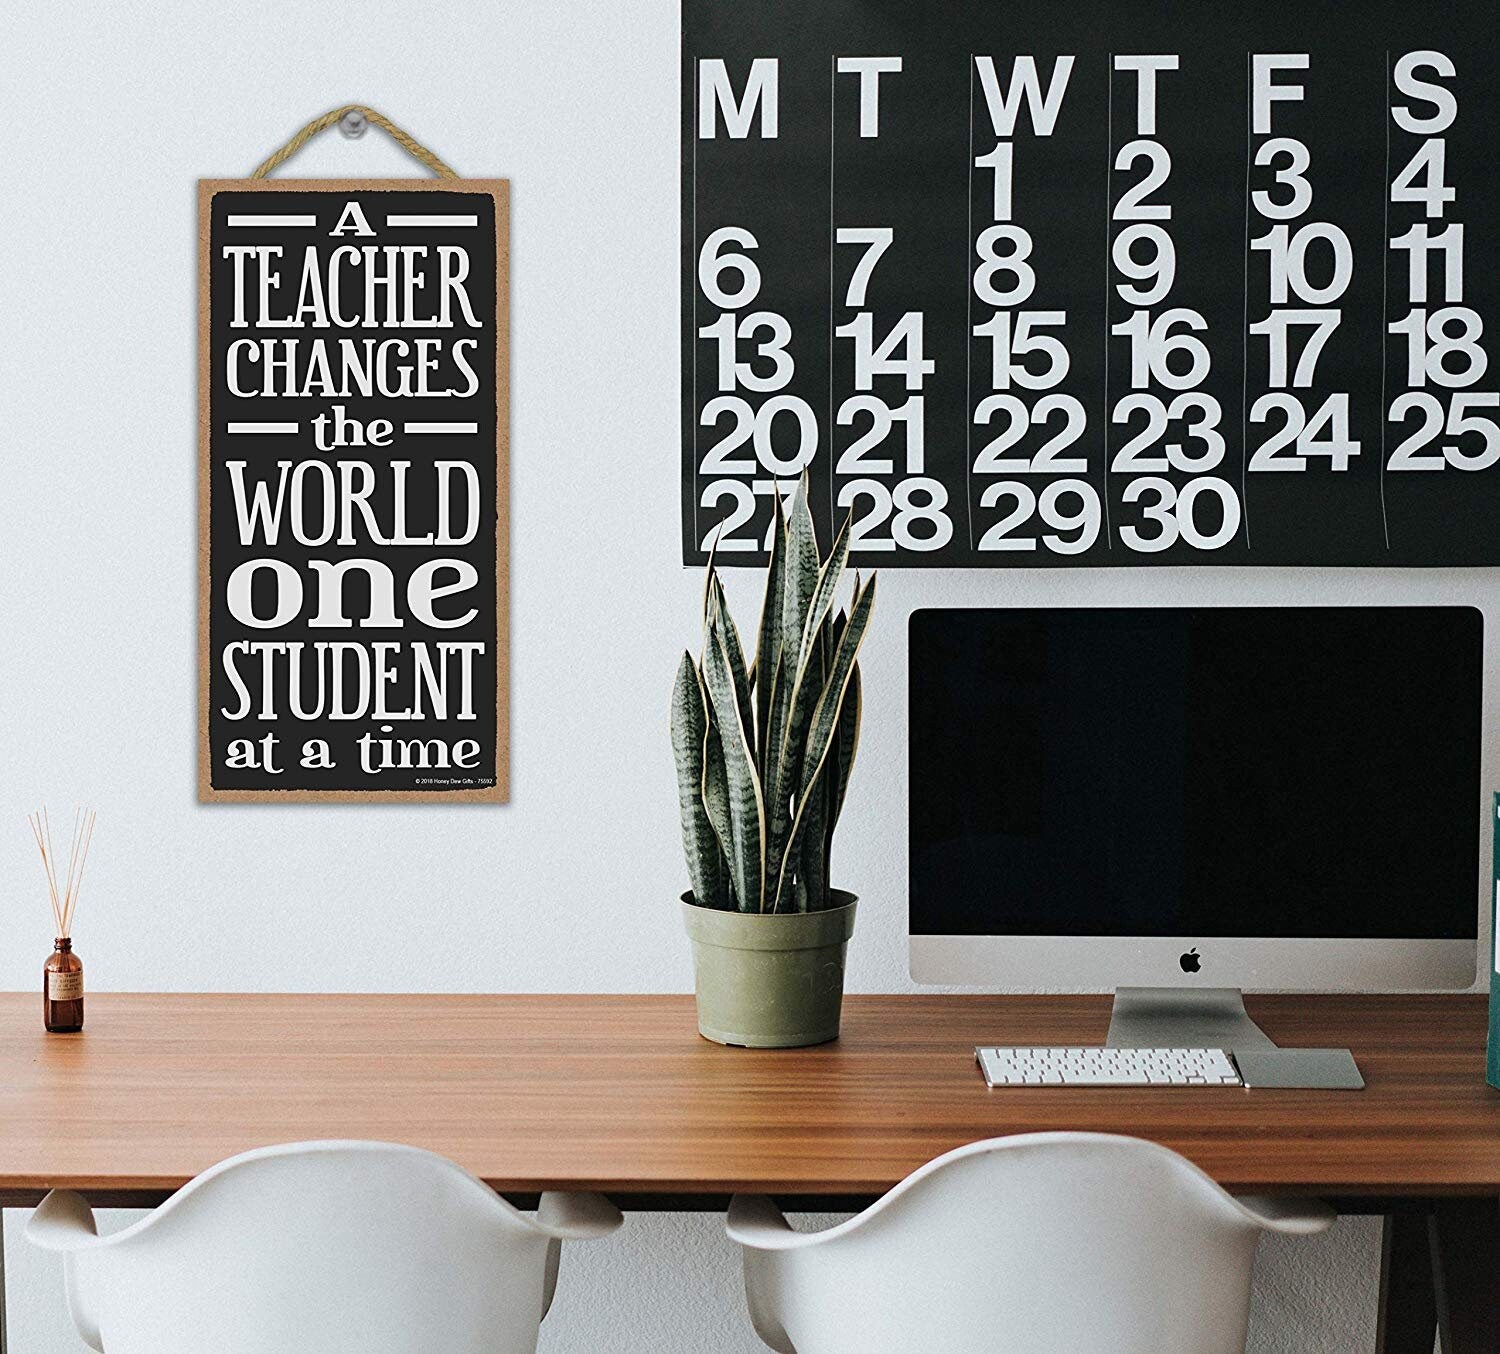 5 x 10 inch Wood Sign A Teacher Changes The World One Student at a Time 